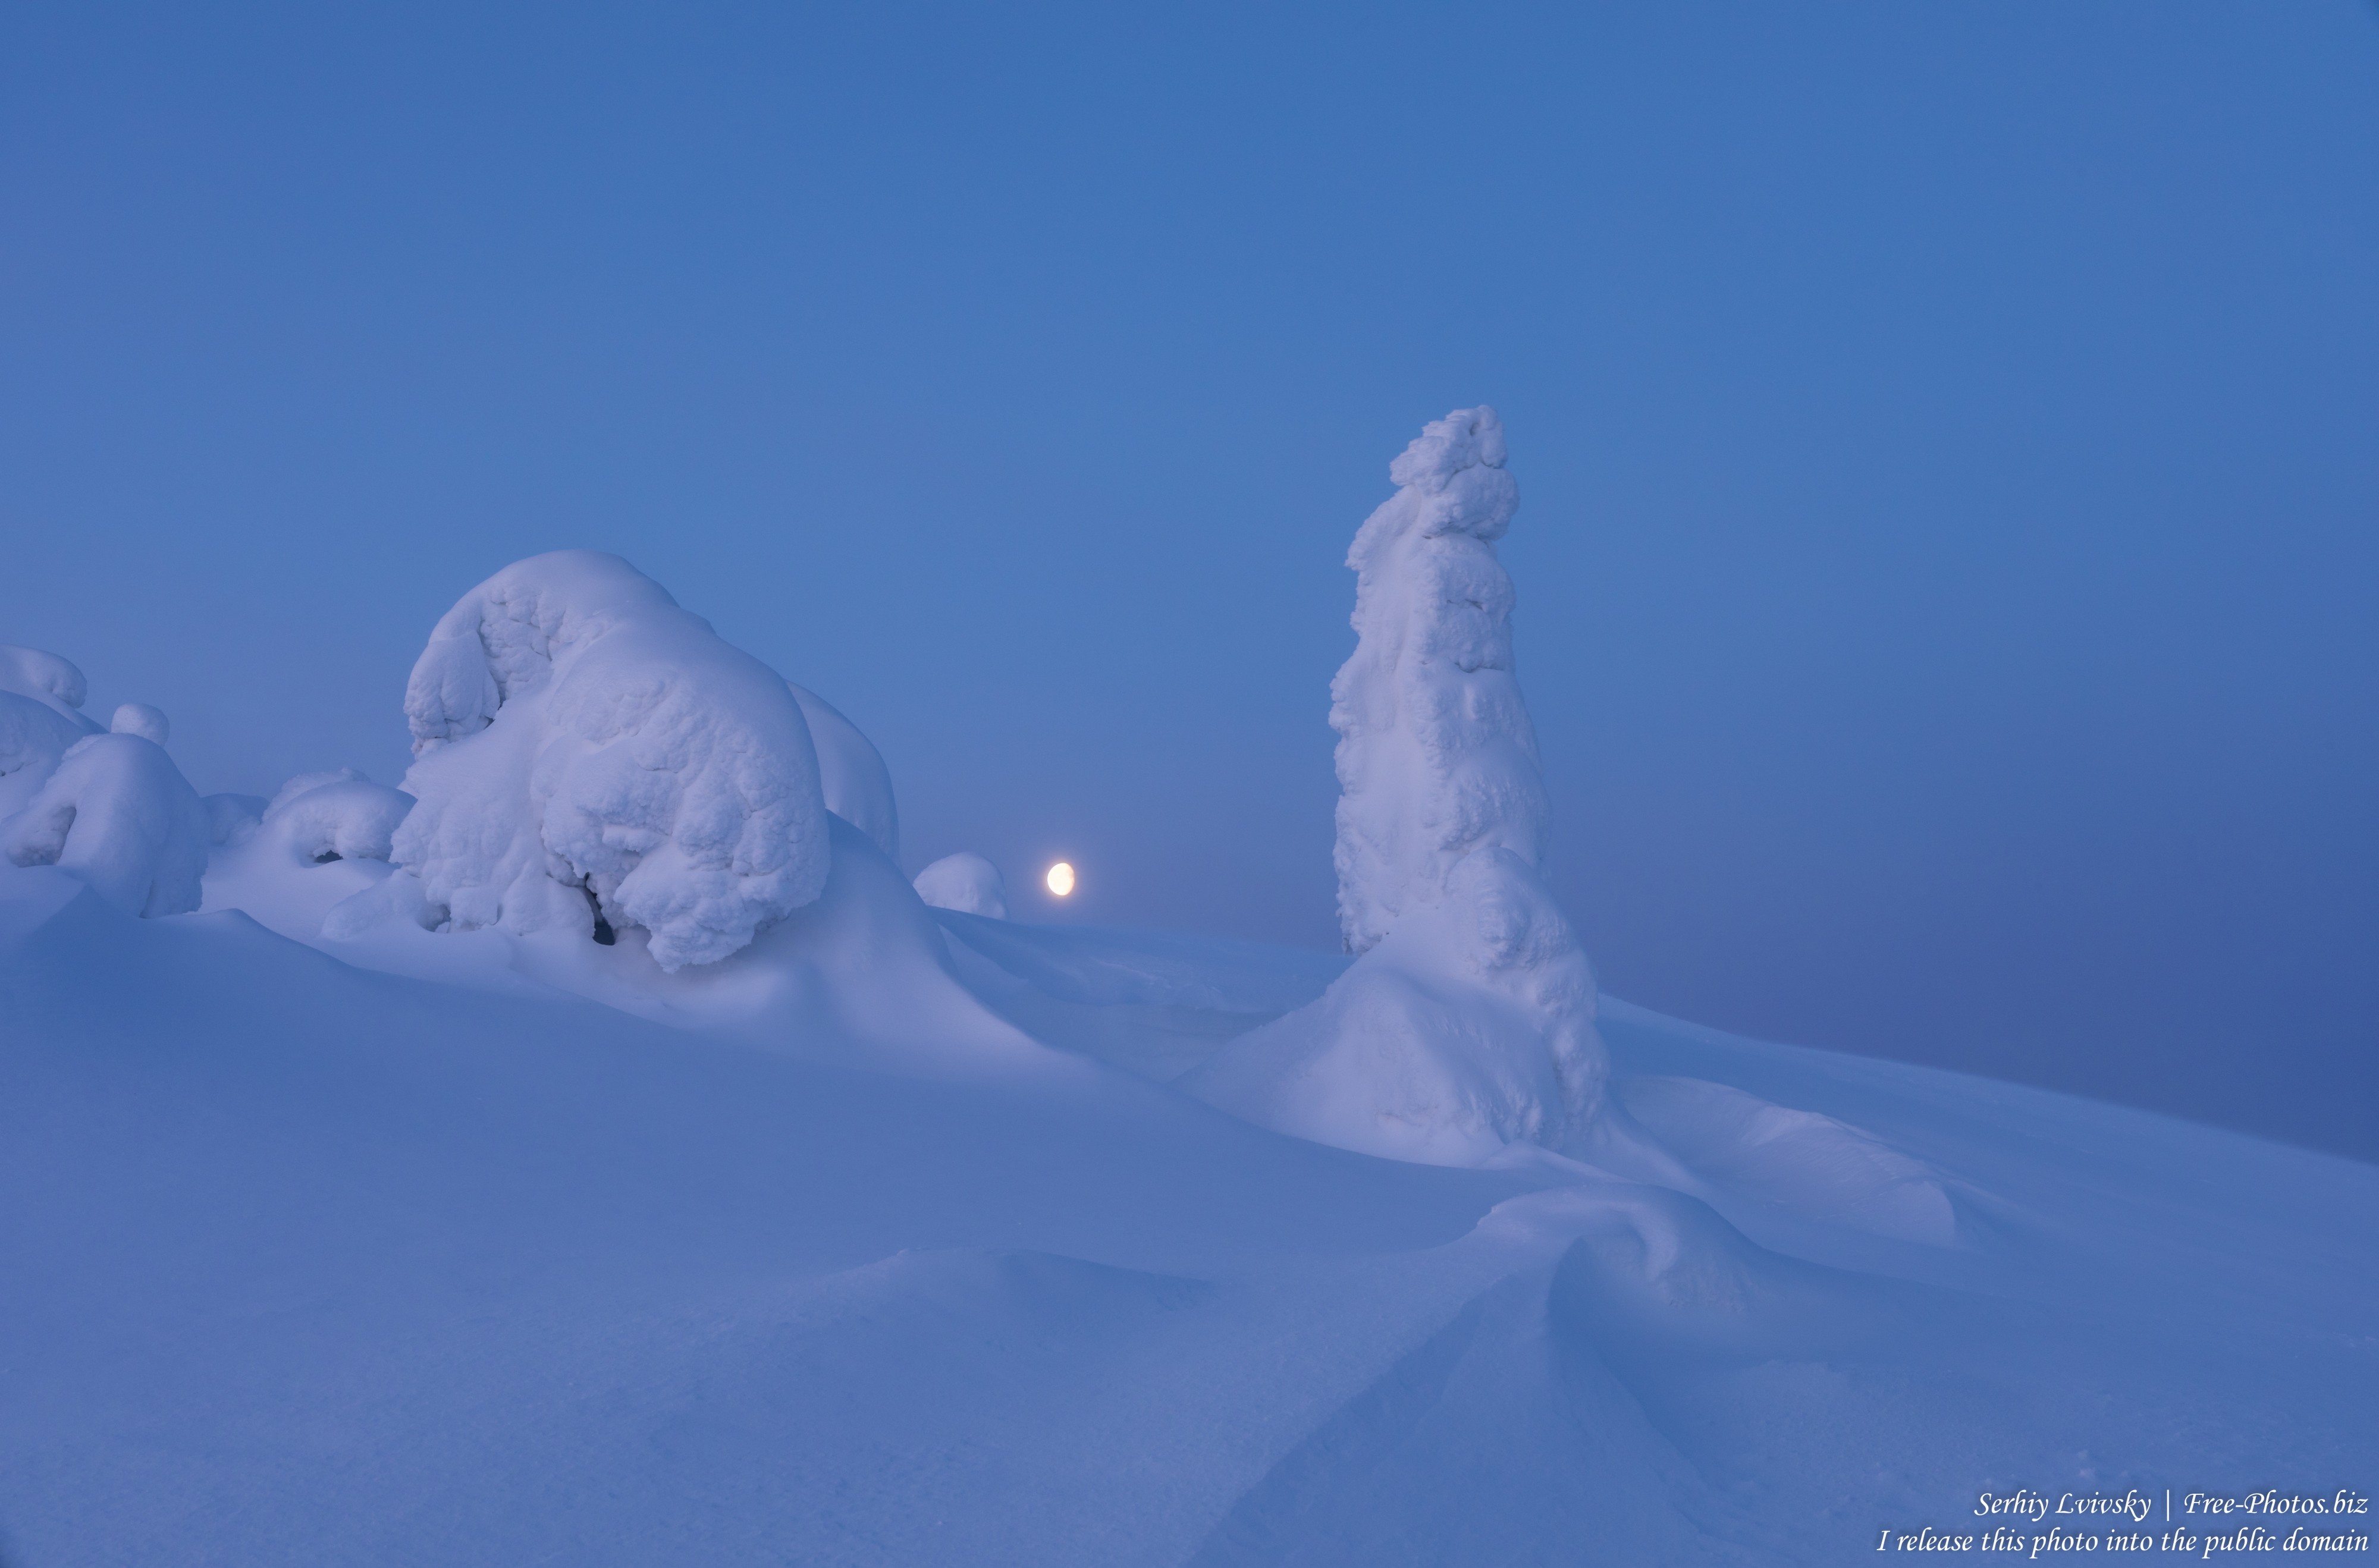 Valtavaara, Finland, photographed in January 2020 by Serhiy Lvivsky, picture 53